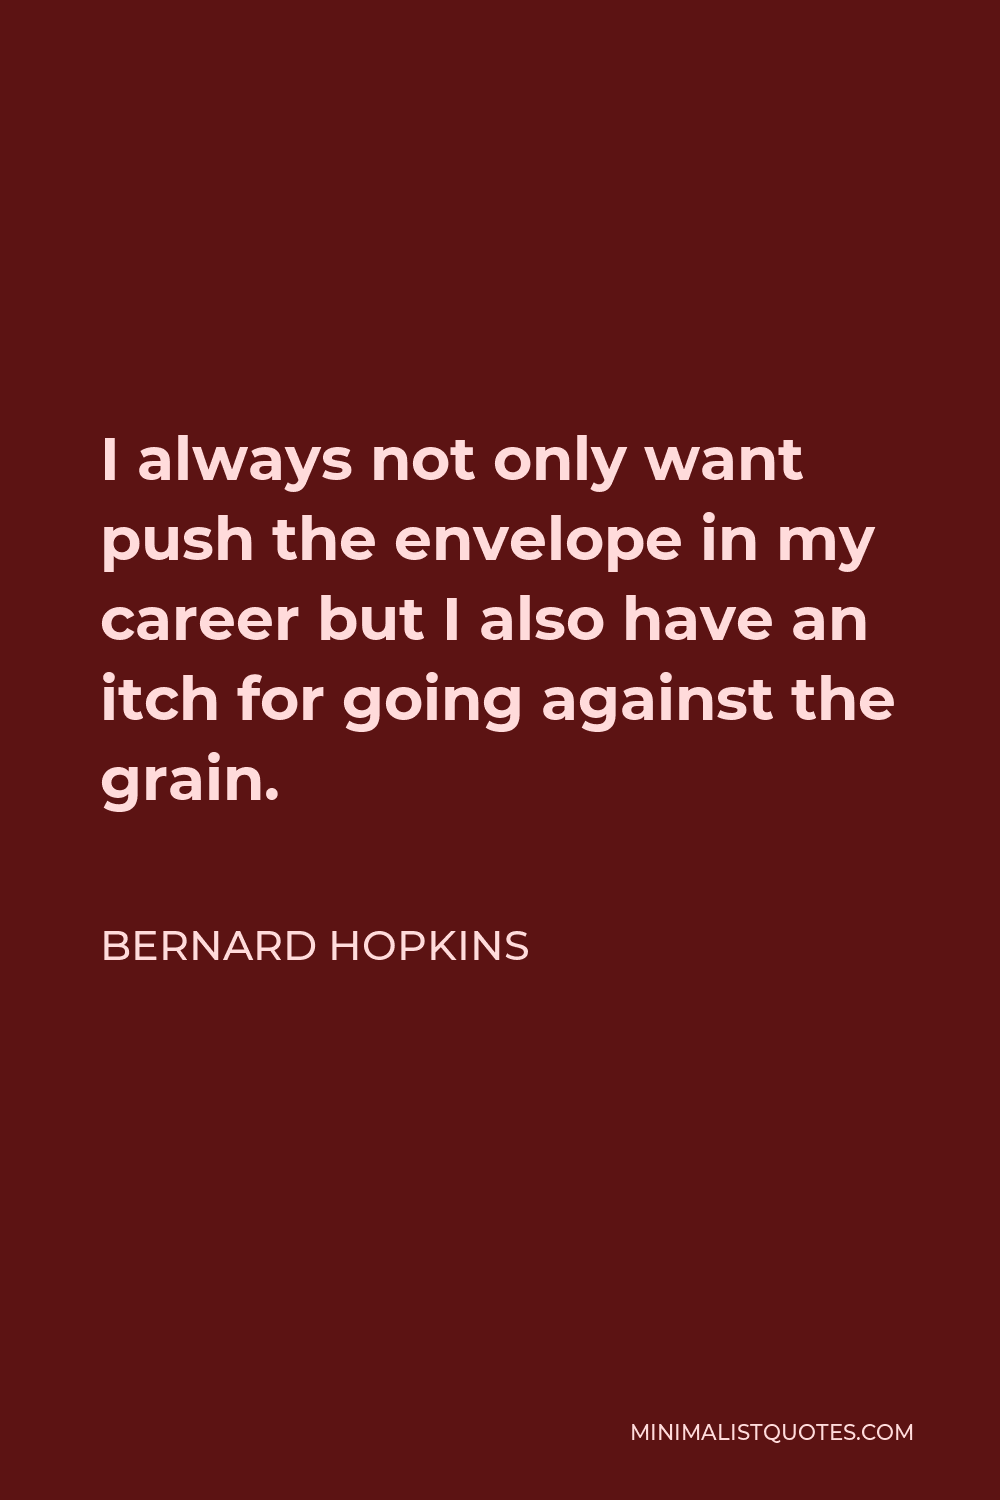 Bernard Hopkins Quote - I always not only want push the envelope in my career but I also have an itch for going against the grain.